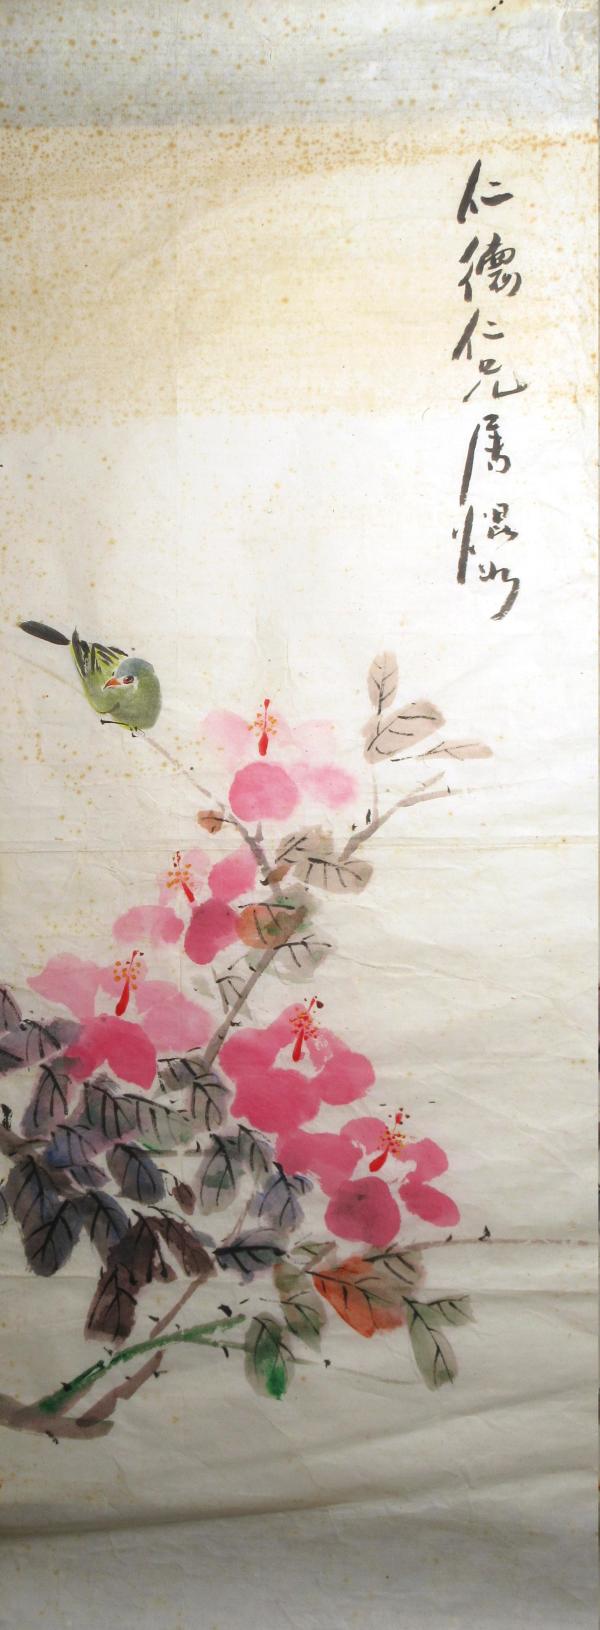 Bird in Hibiscus by Kwan Y. Jung